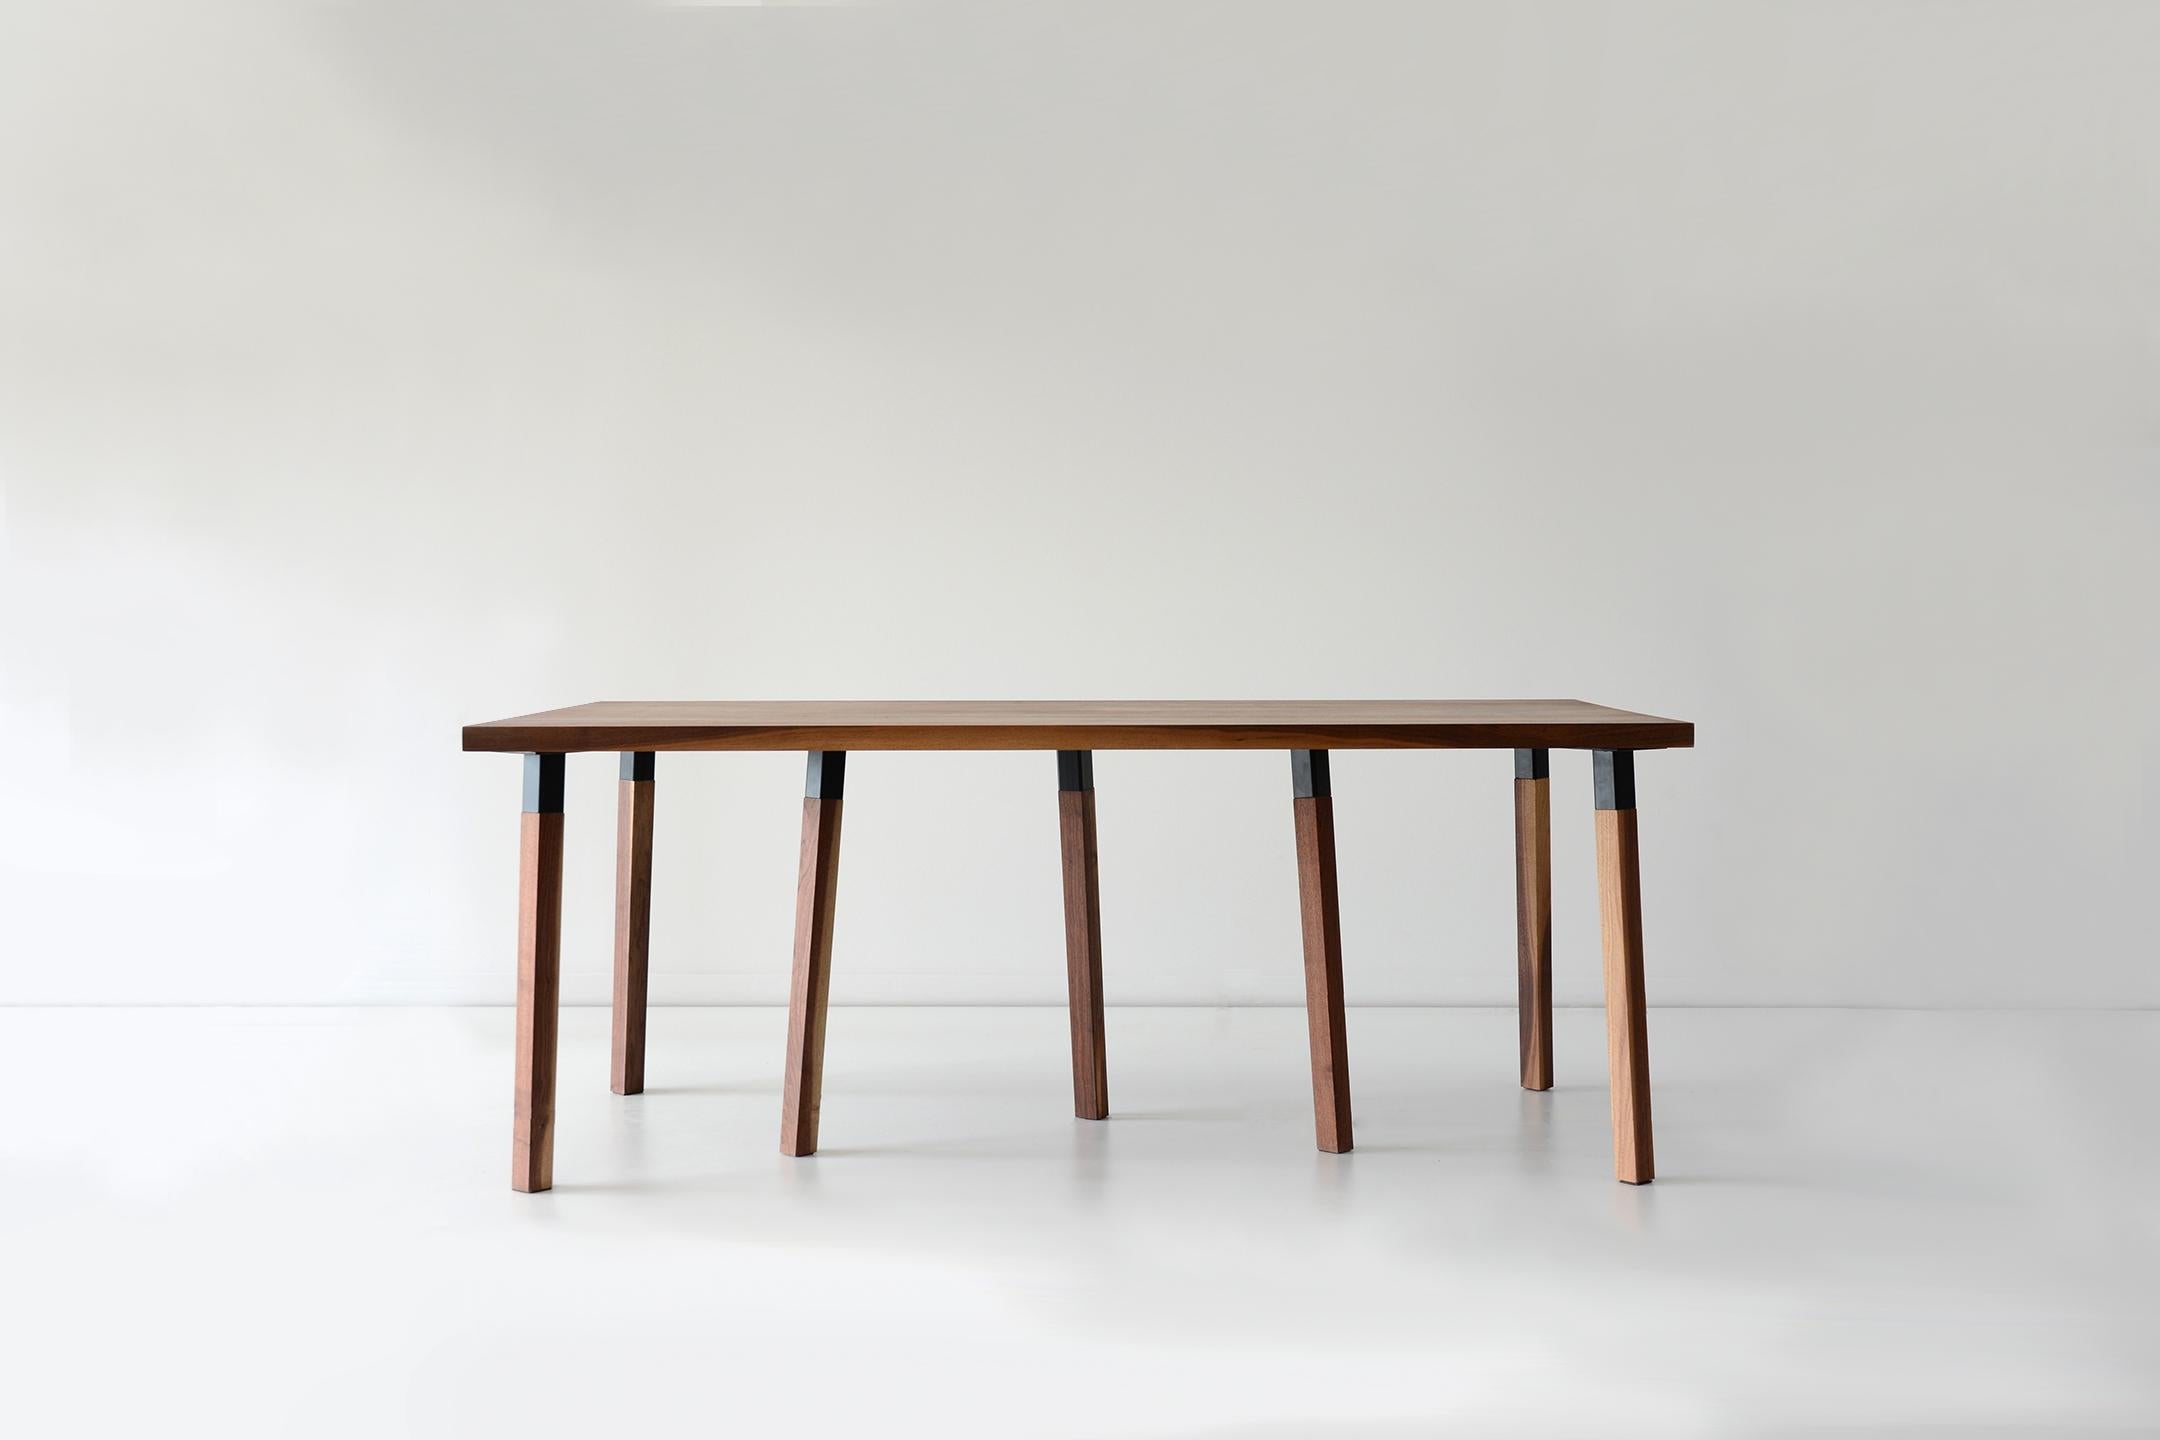 Walnut small pier dining table by Hollis & Morris
Dimensions: 84